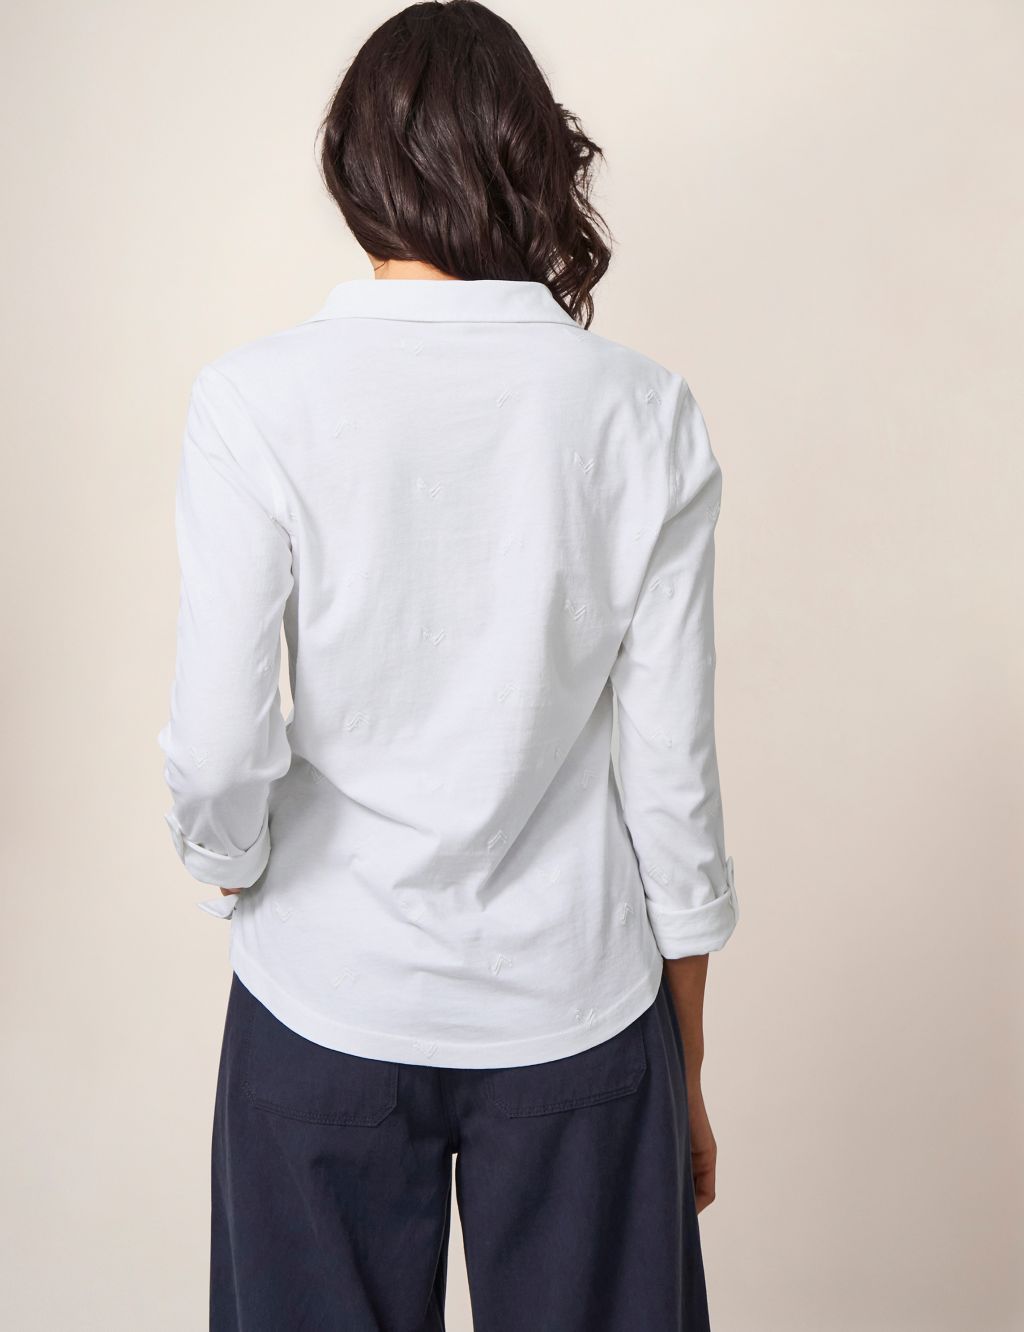 Organic Cotton Embroidered Collared Shirt image 2